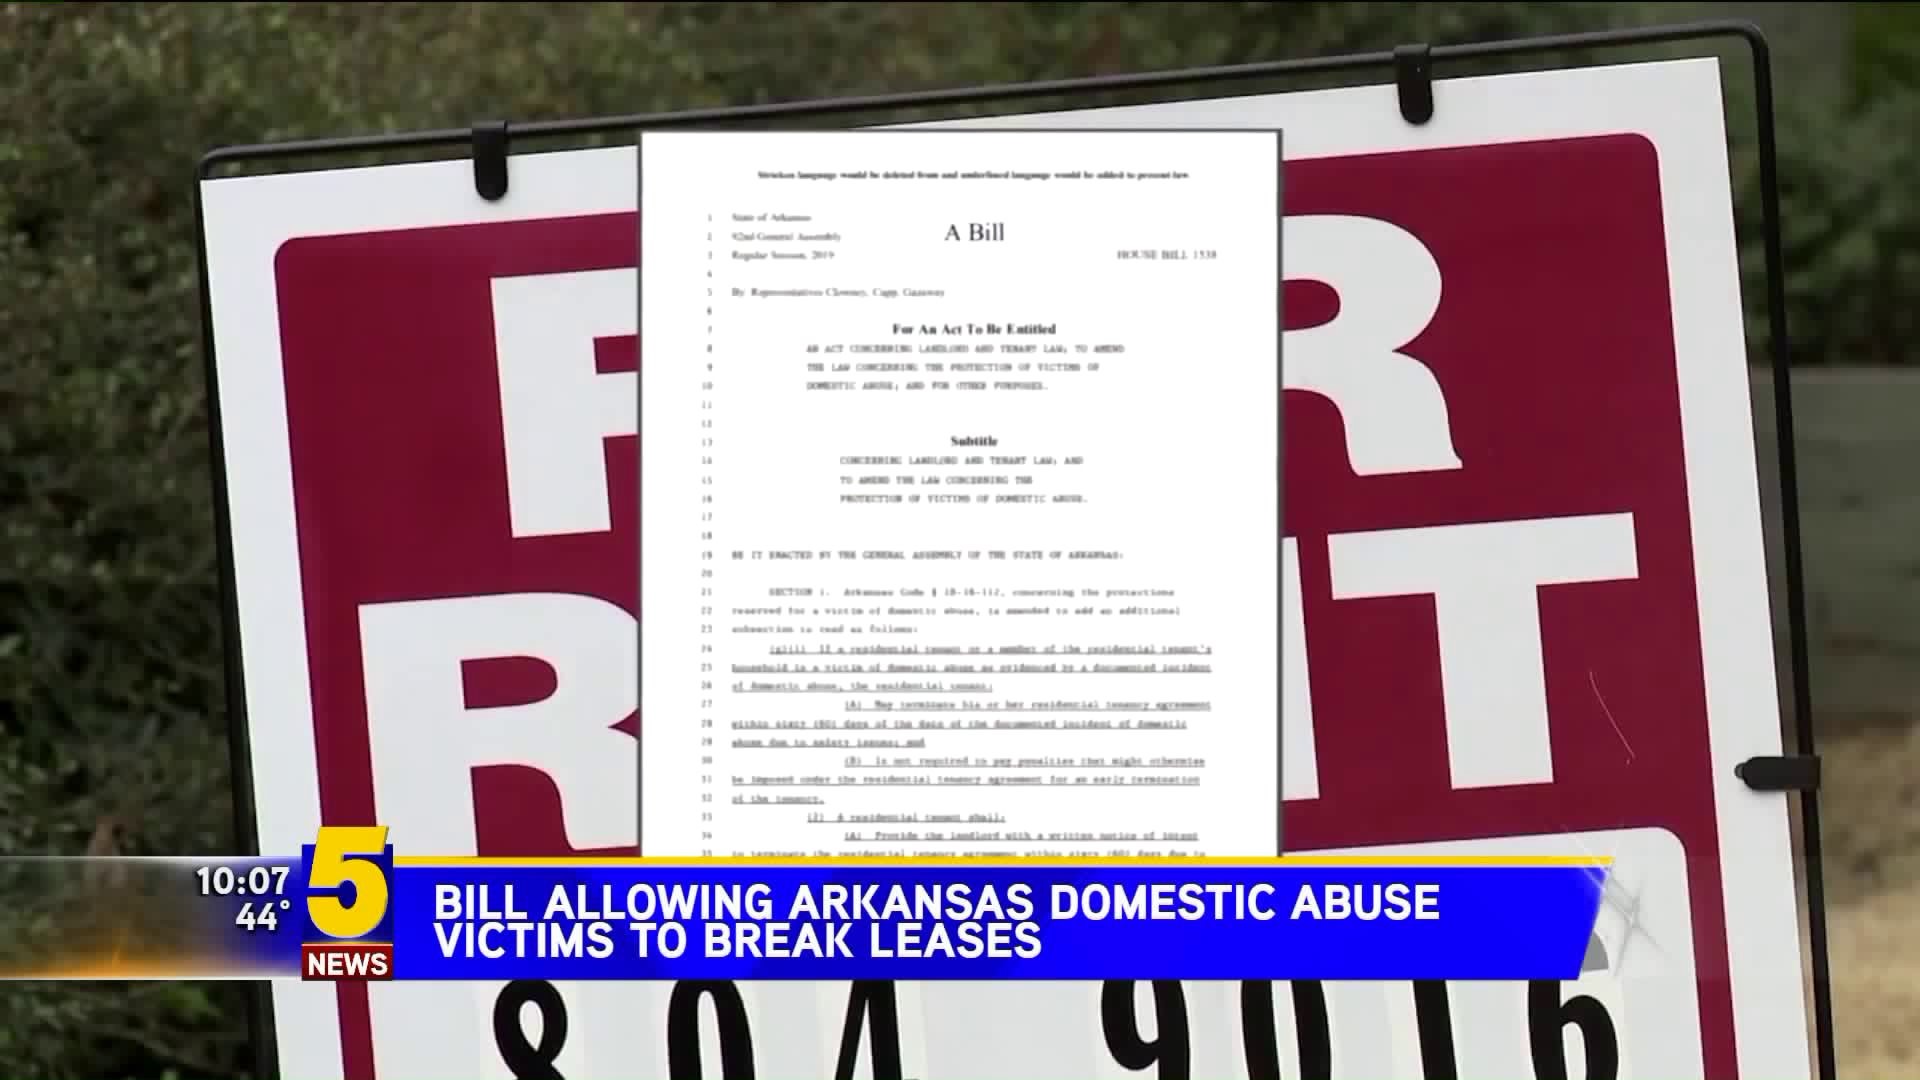 Bill Allowing AR Domestic Abuse Victims To Break Leases